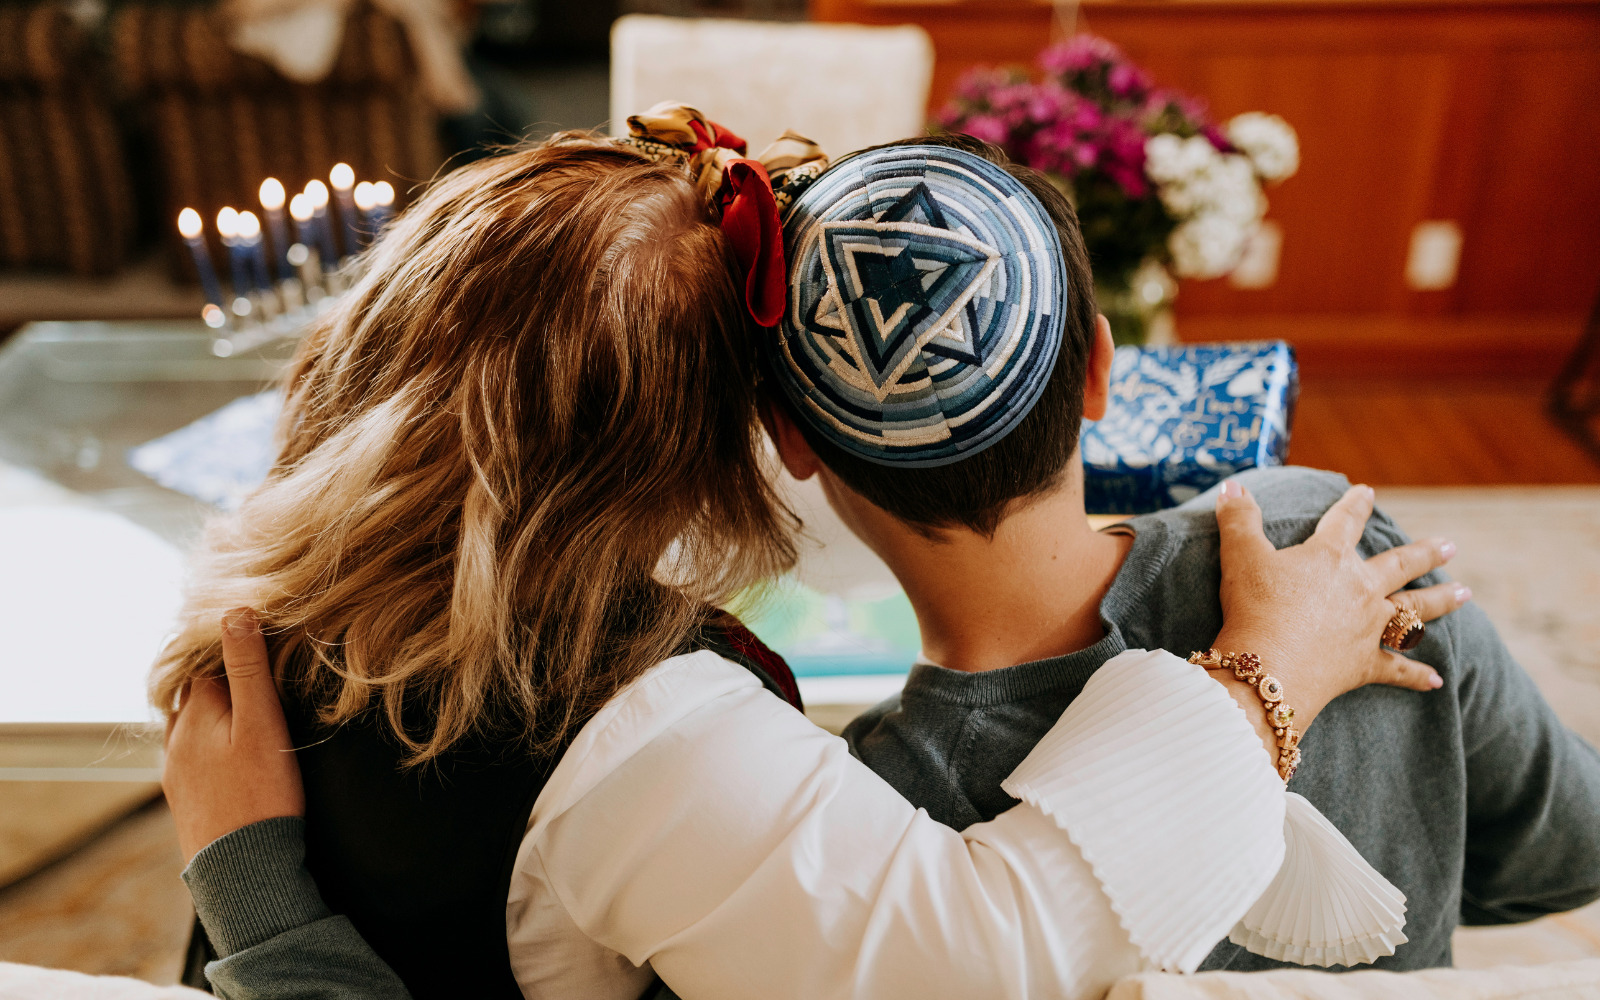 A photo taken from the back of a man and woman's head. The man is wearing a kippah.